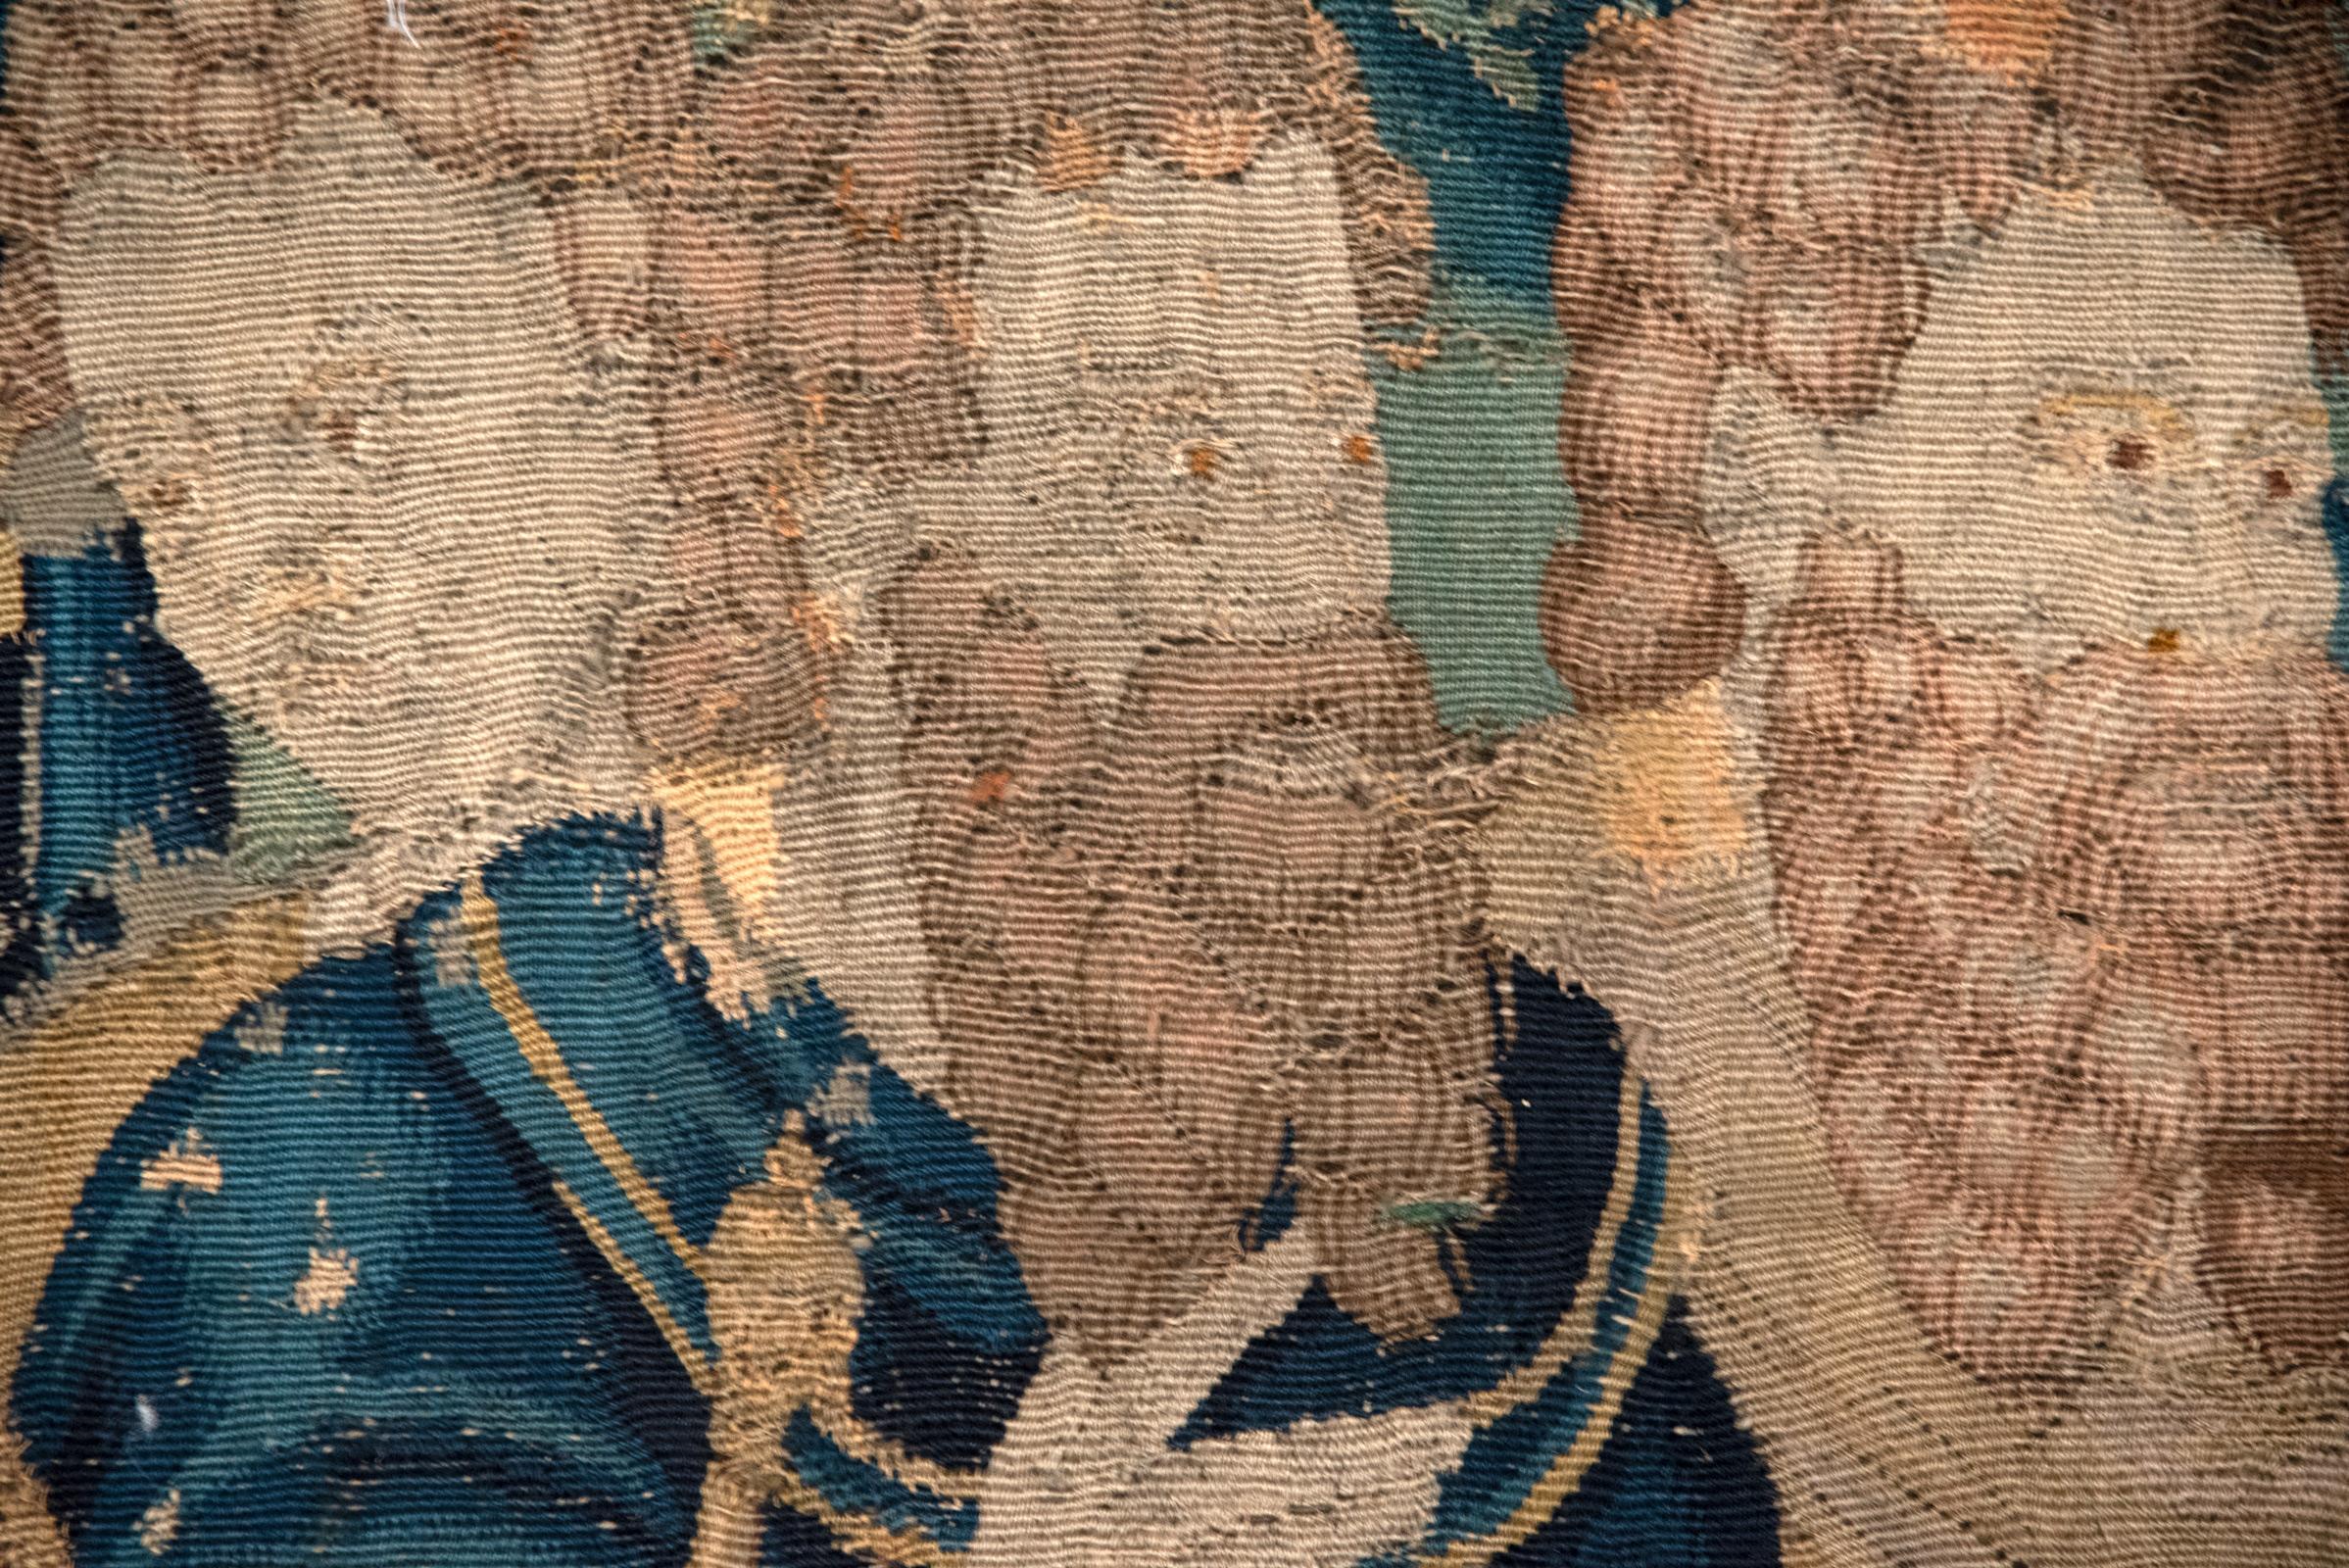 Depicting the moment the moment described in Genesis 14:20 when Abraham, Father of three faiths (i.e. Judaism, Christianity, and Islam), paid tithes to the leader of Jerusalem, Melchizedek. This tapestry was woven in Brussels, and would have been